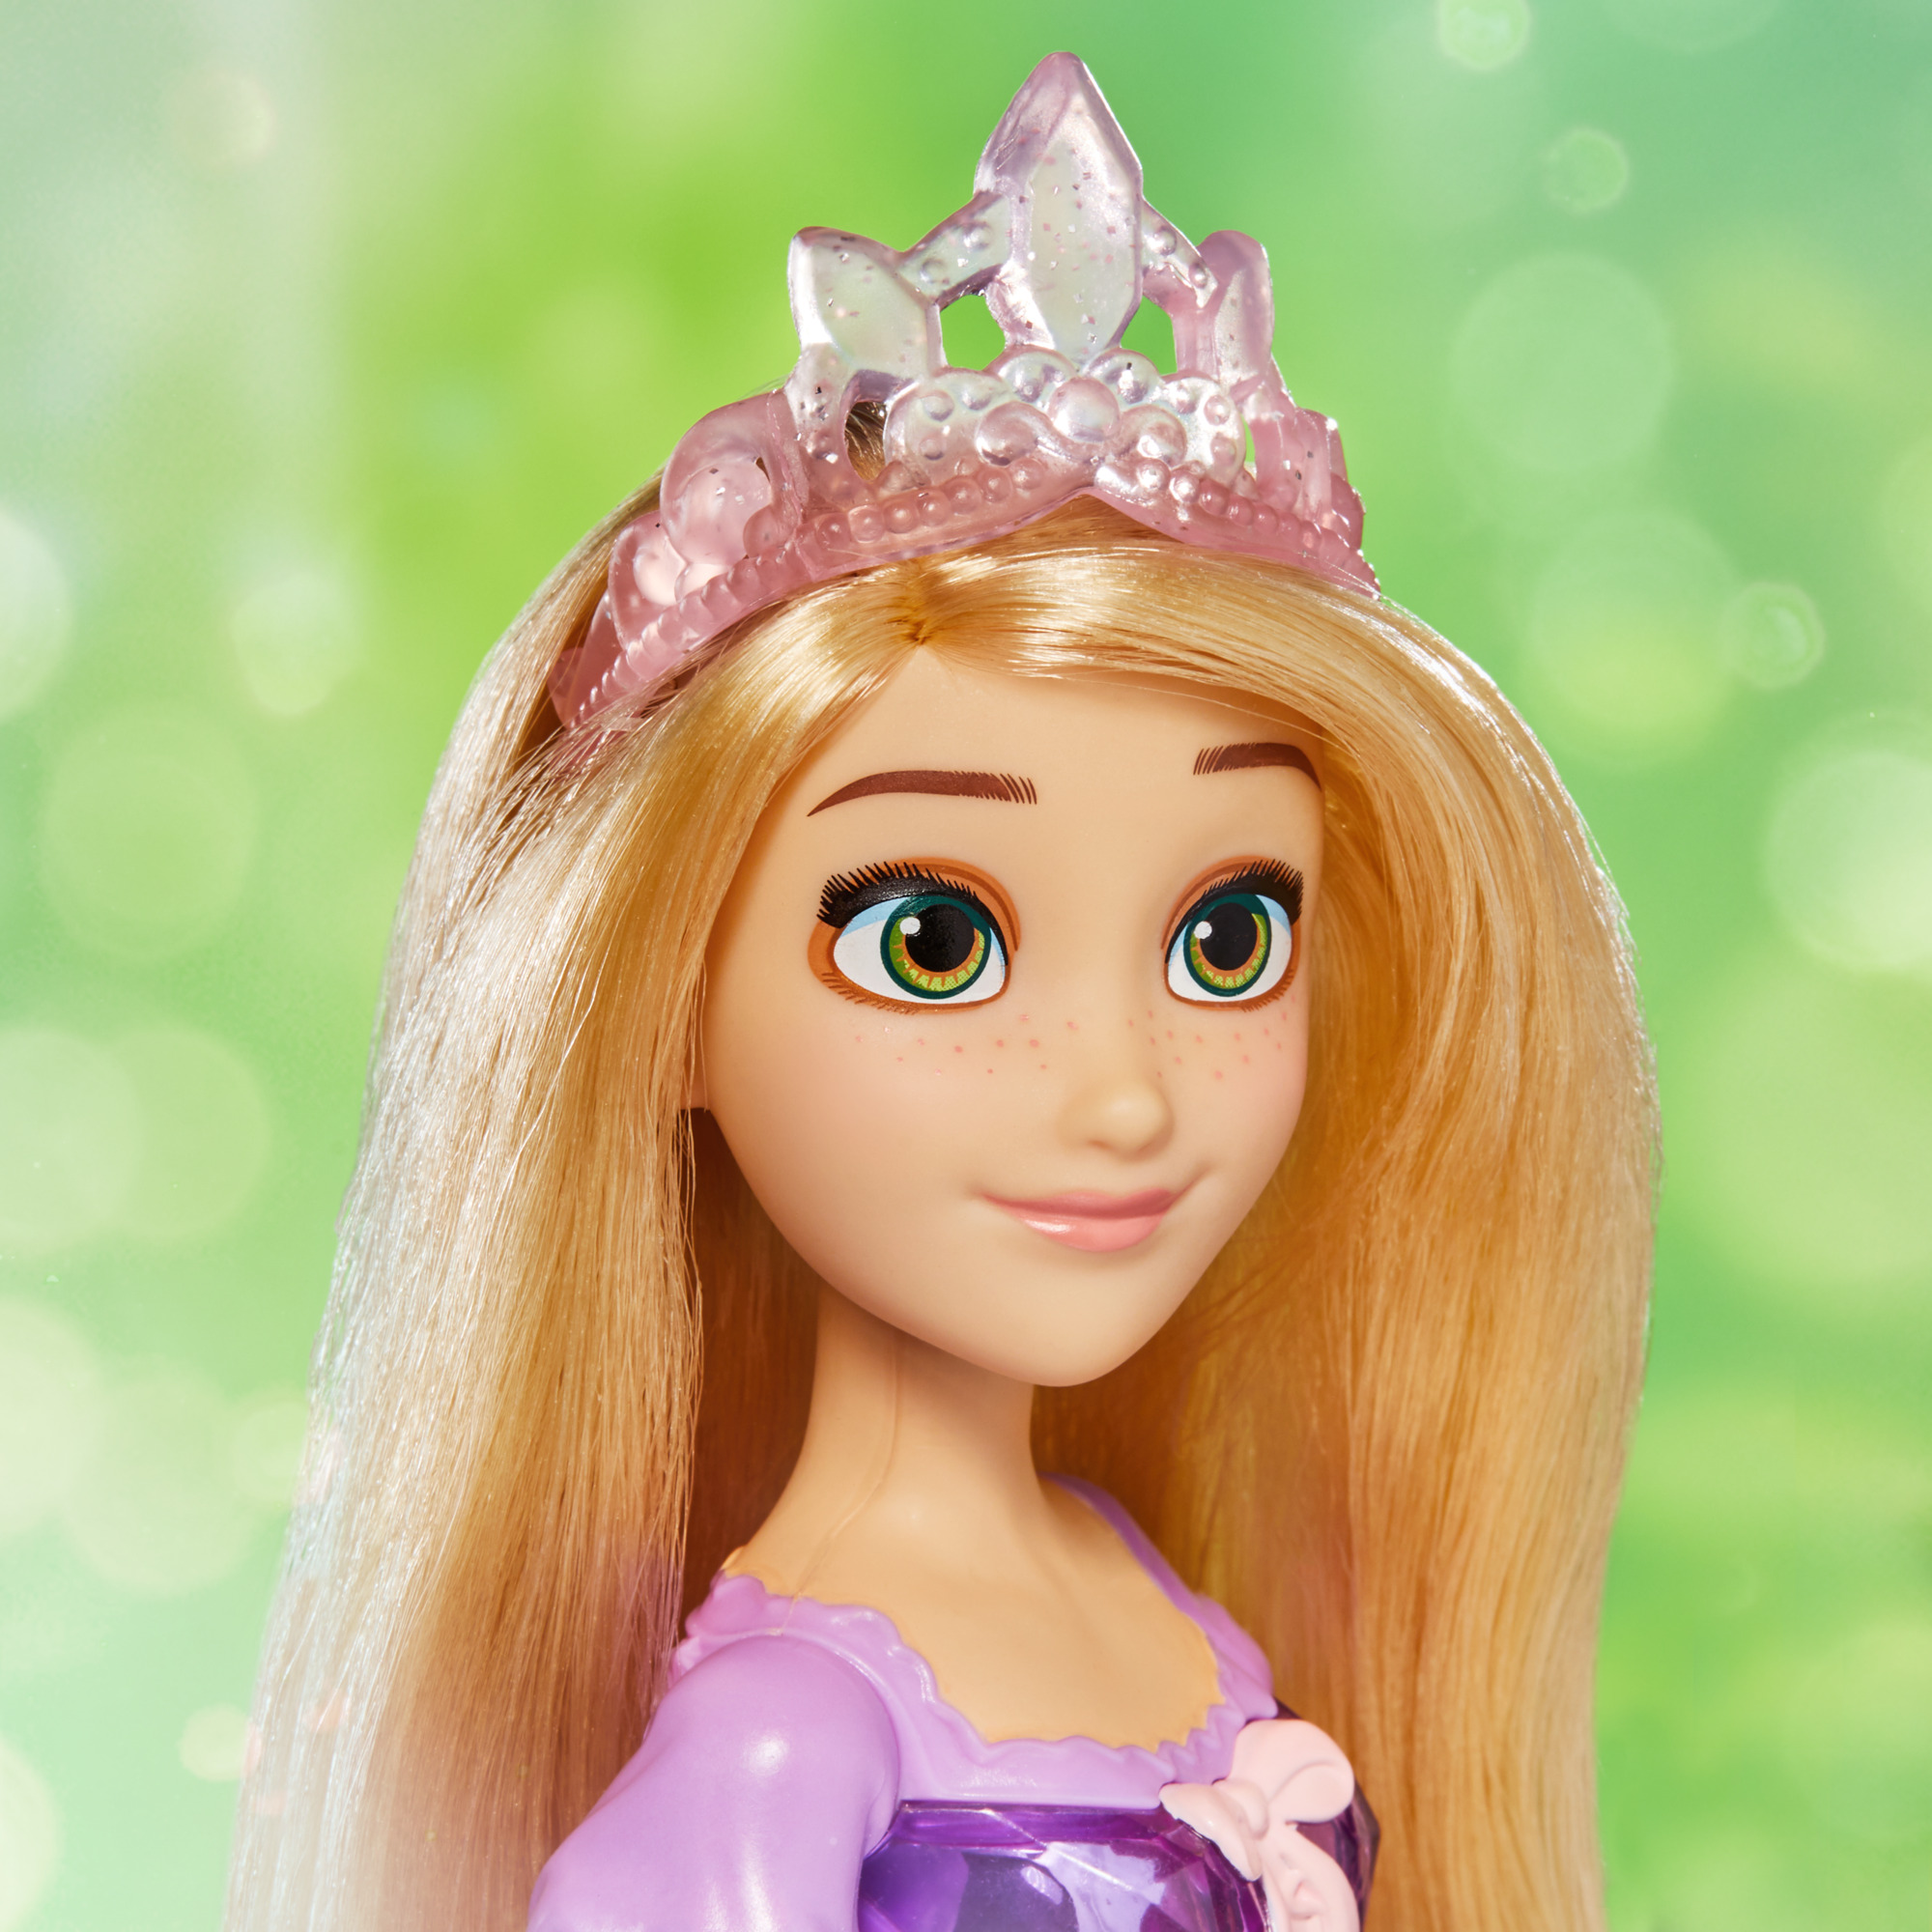 Disney Princess Royal Shimmer Rapunzel Doll, with Skirt and Accessories - image 4 of 8